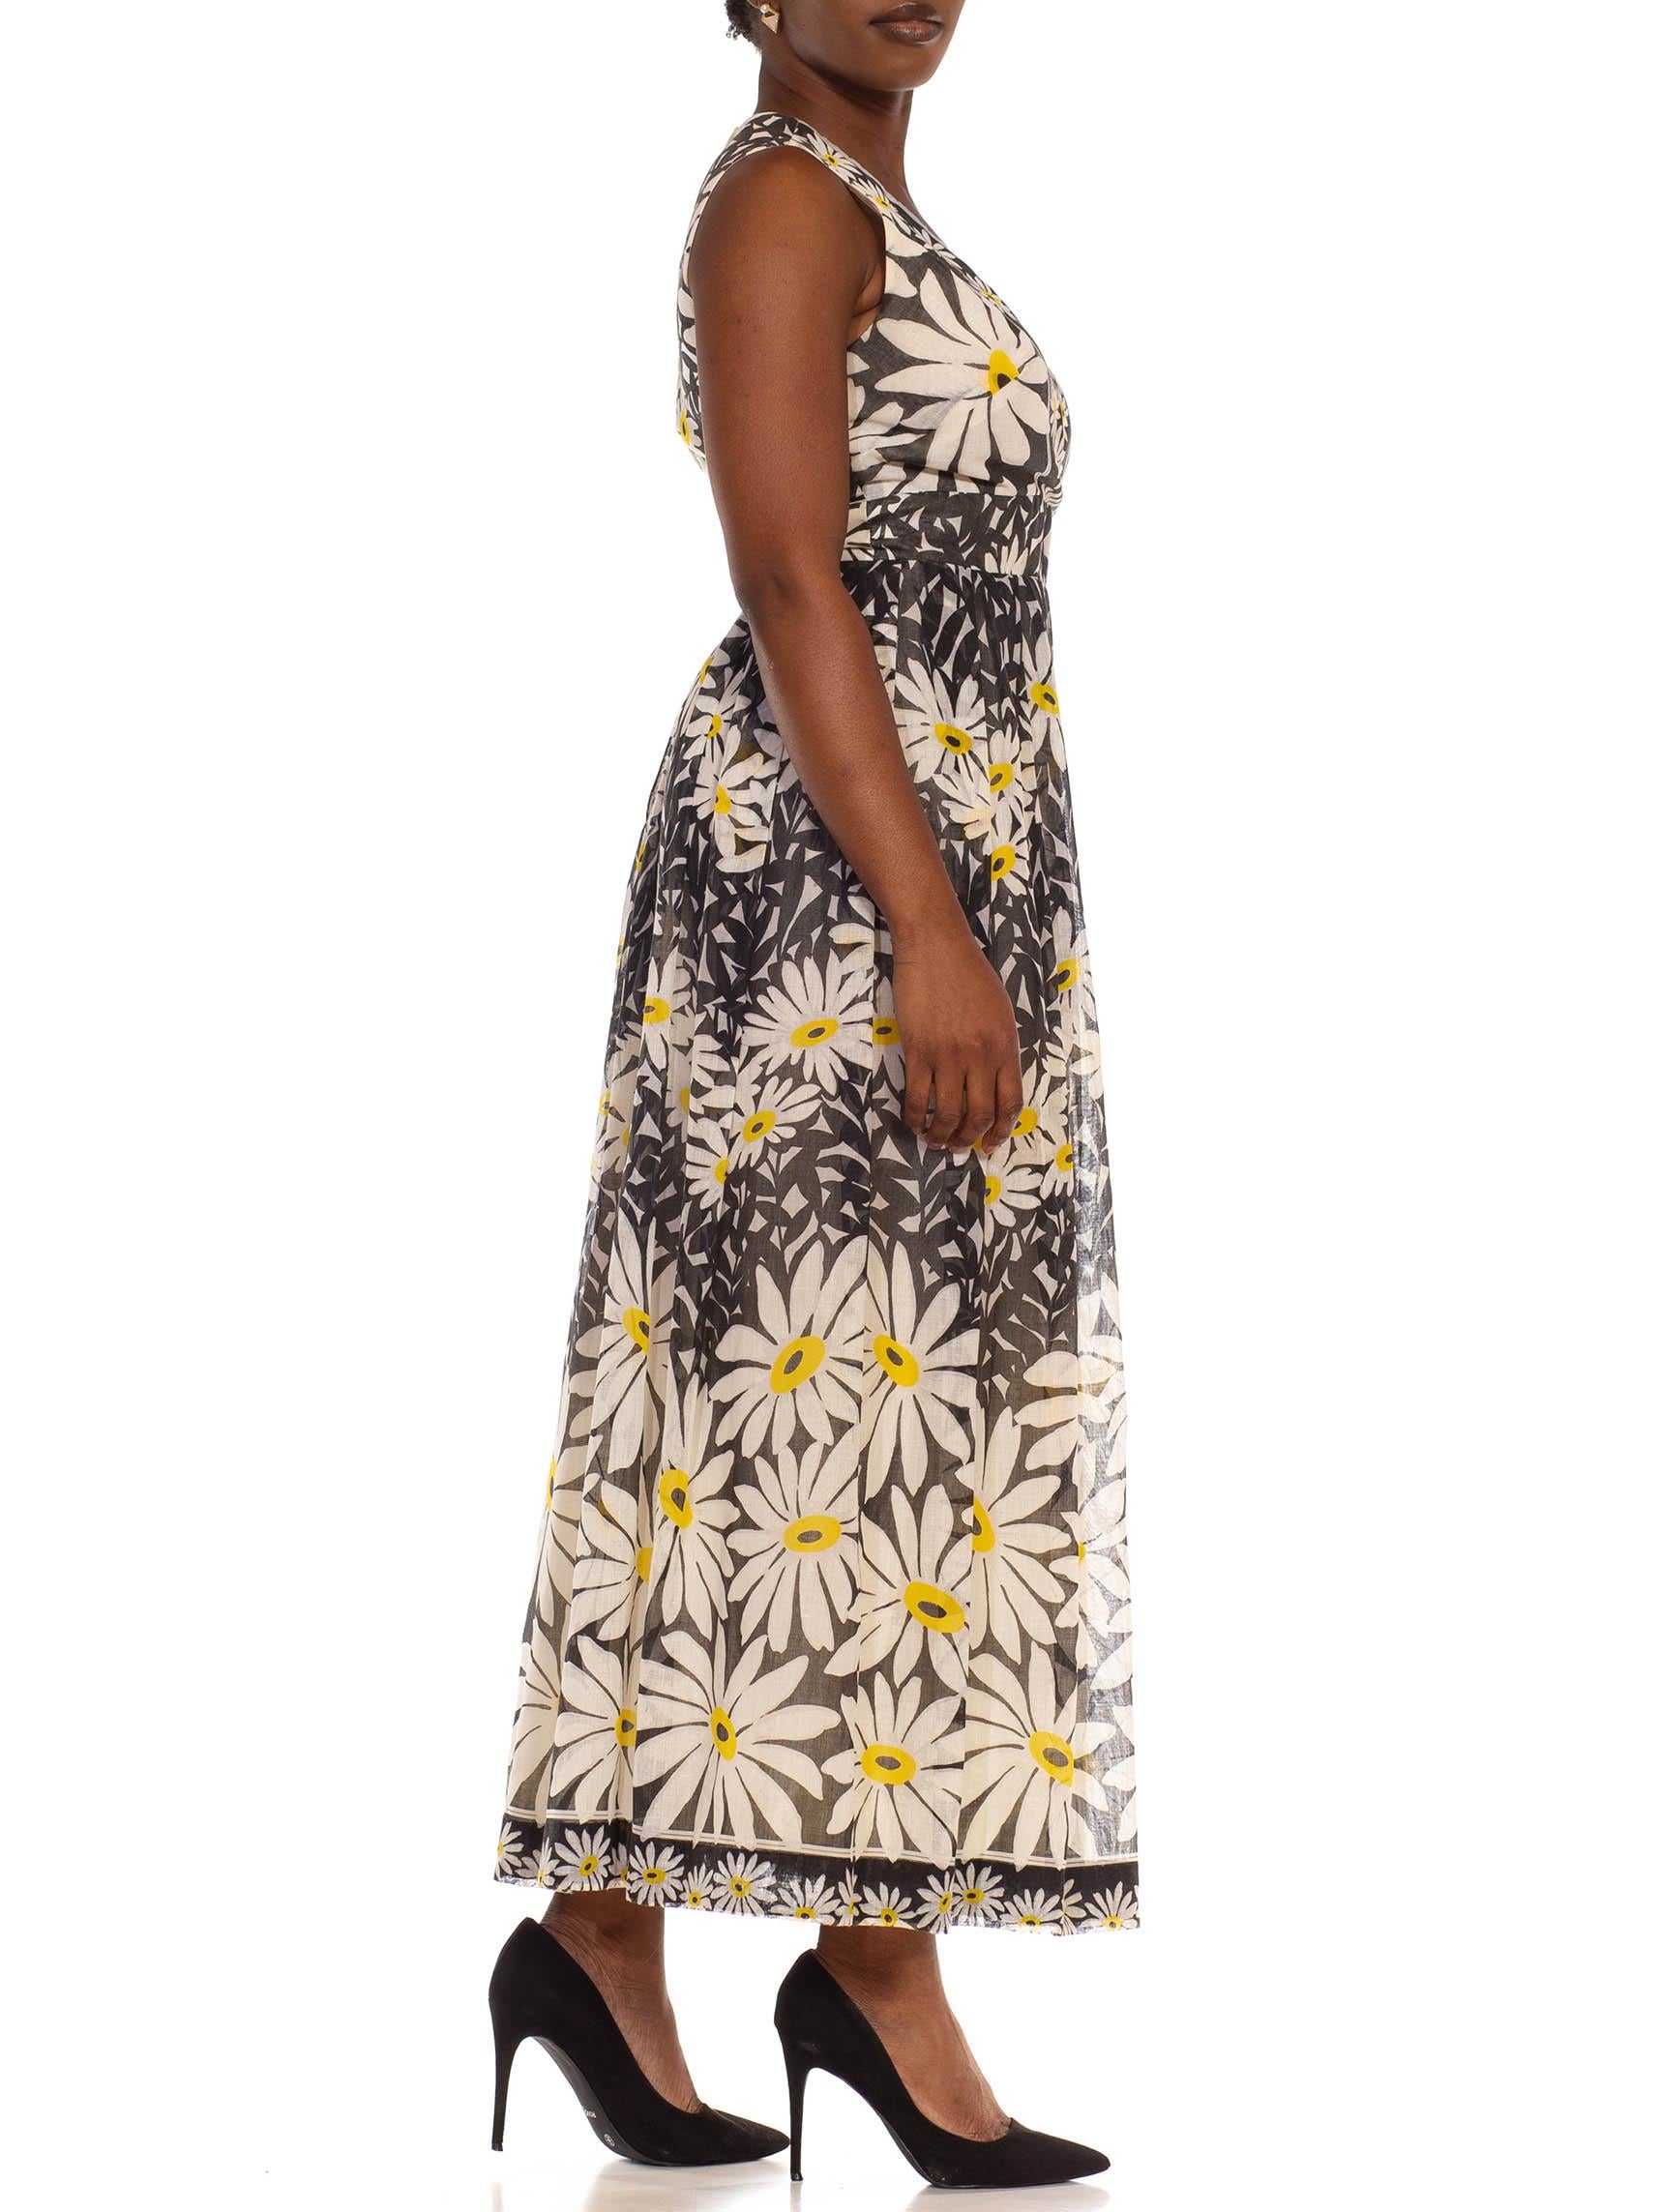 1970S Black, White  & Yellow Cotton Sleeveless Plunging V-Neck Daisy Floral Dress